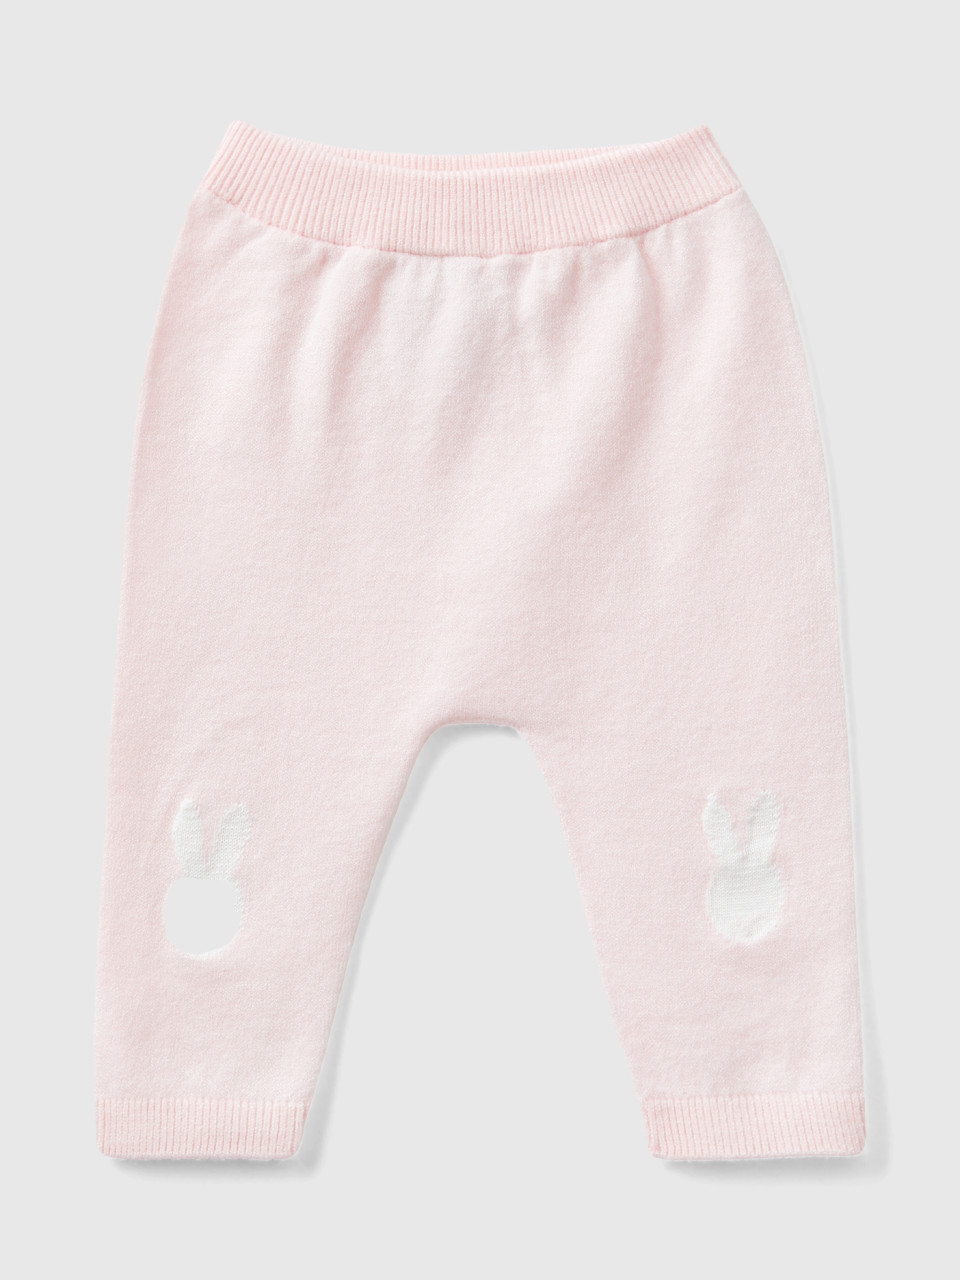 Benetton, Knit Trousers With Inlay, Soft Pink, Kids